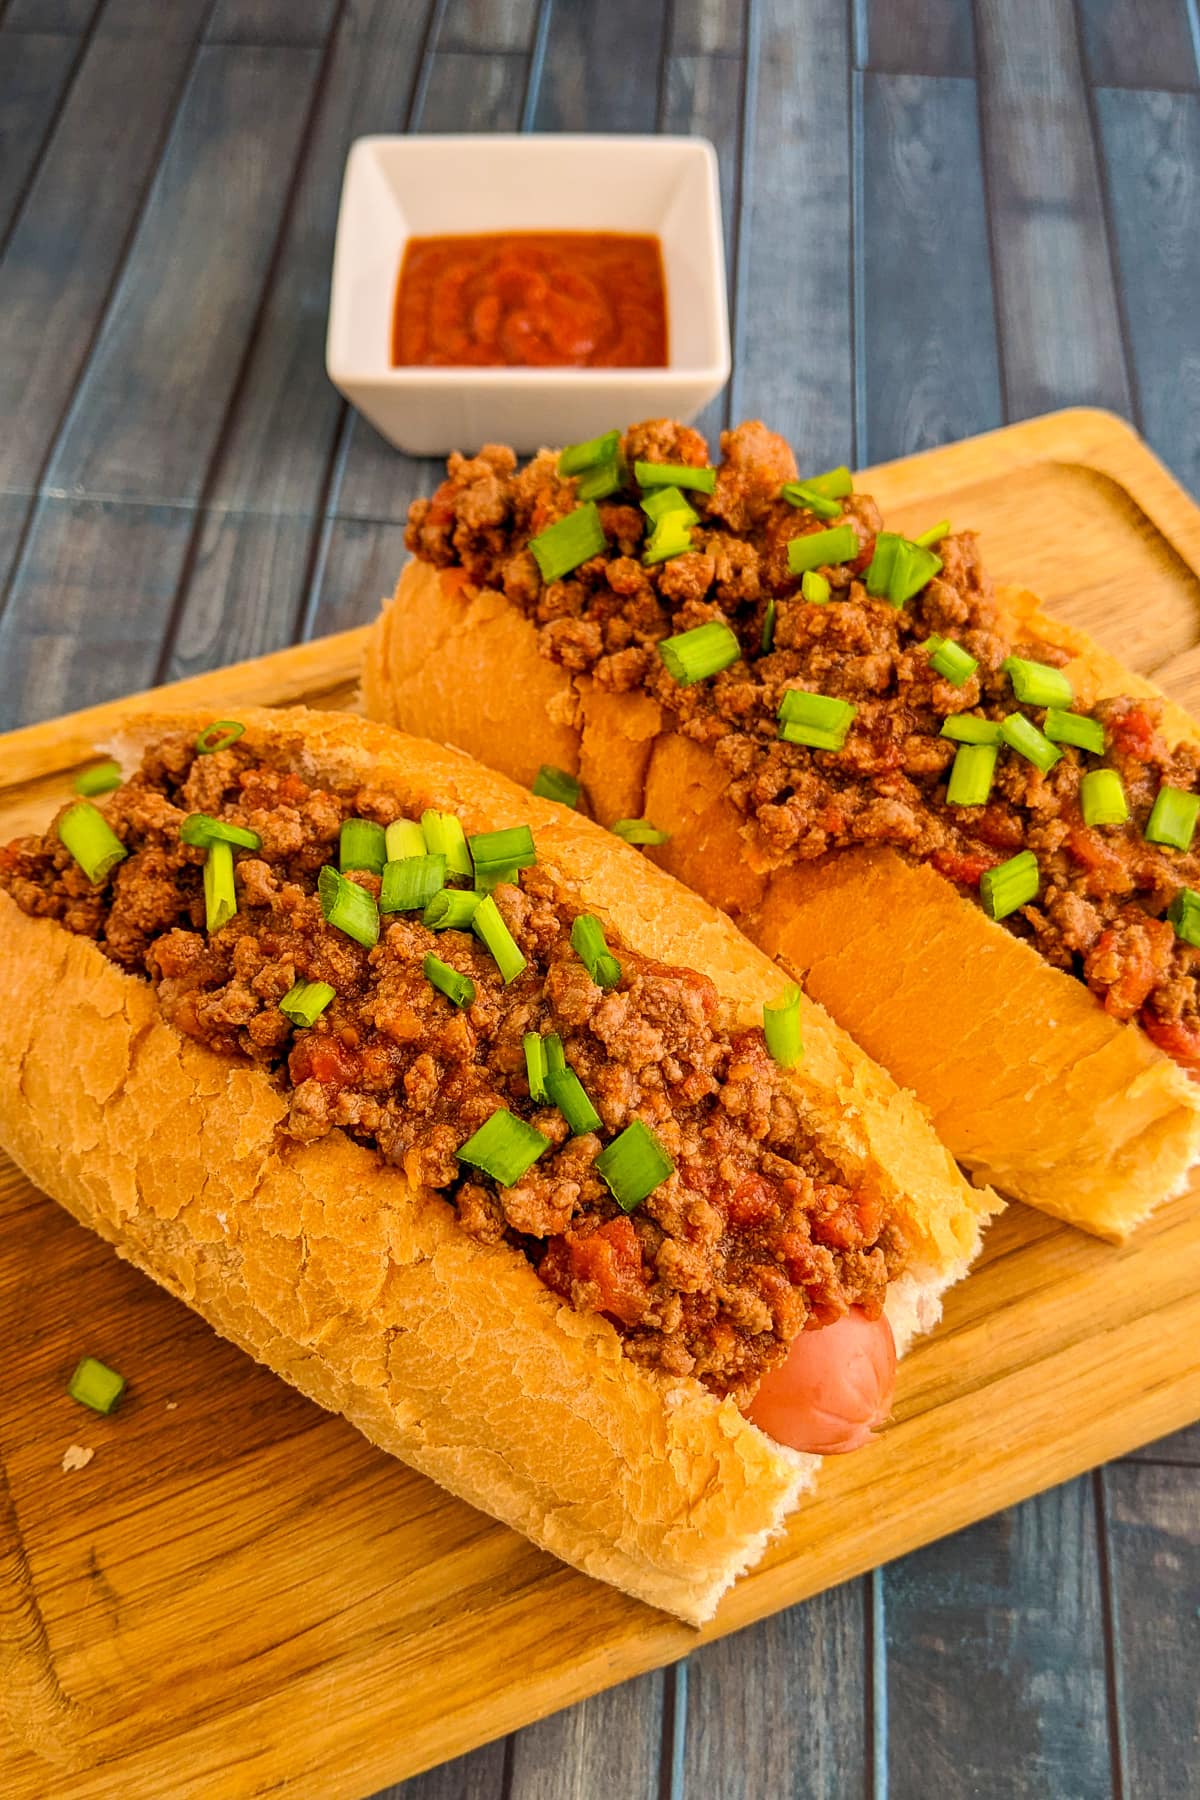 Old-fashioned hot dog with ground beef and sausages in a cutting board.